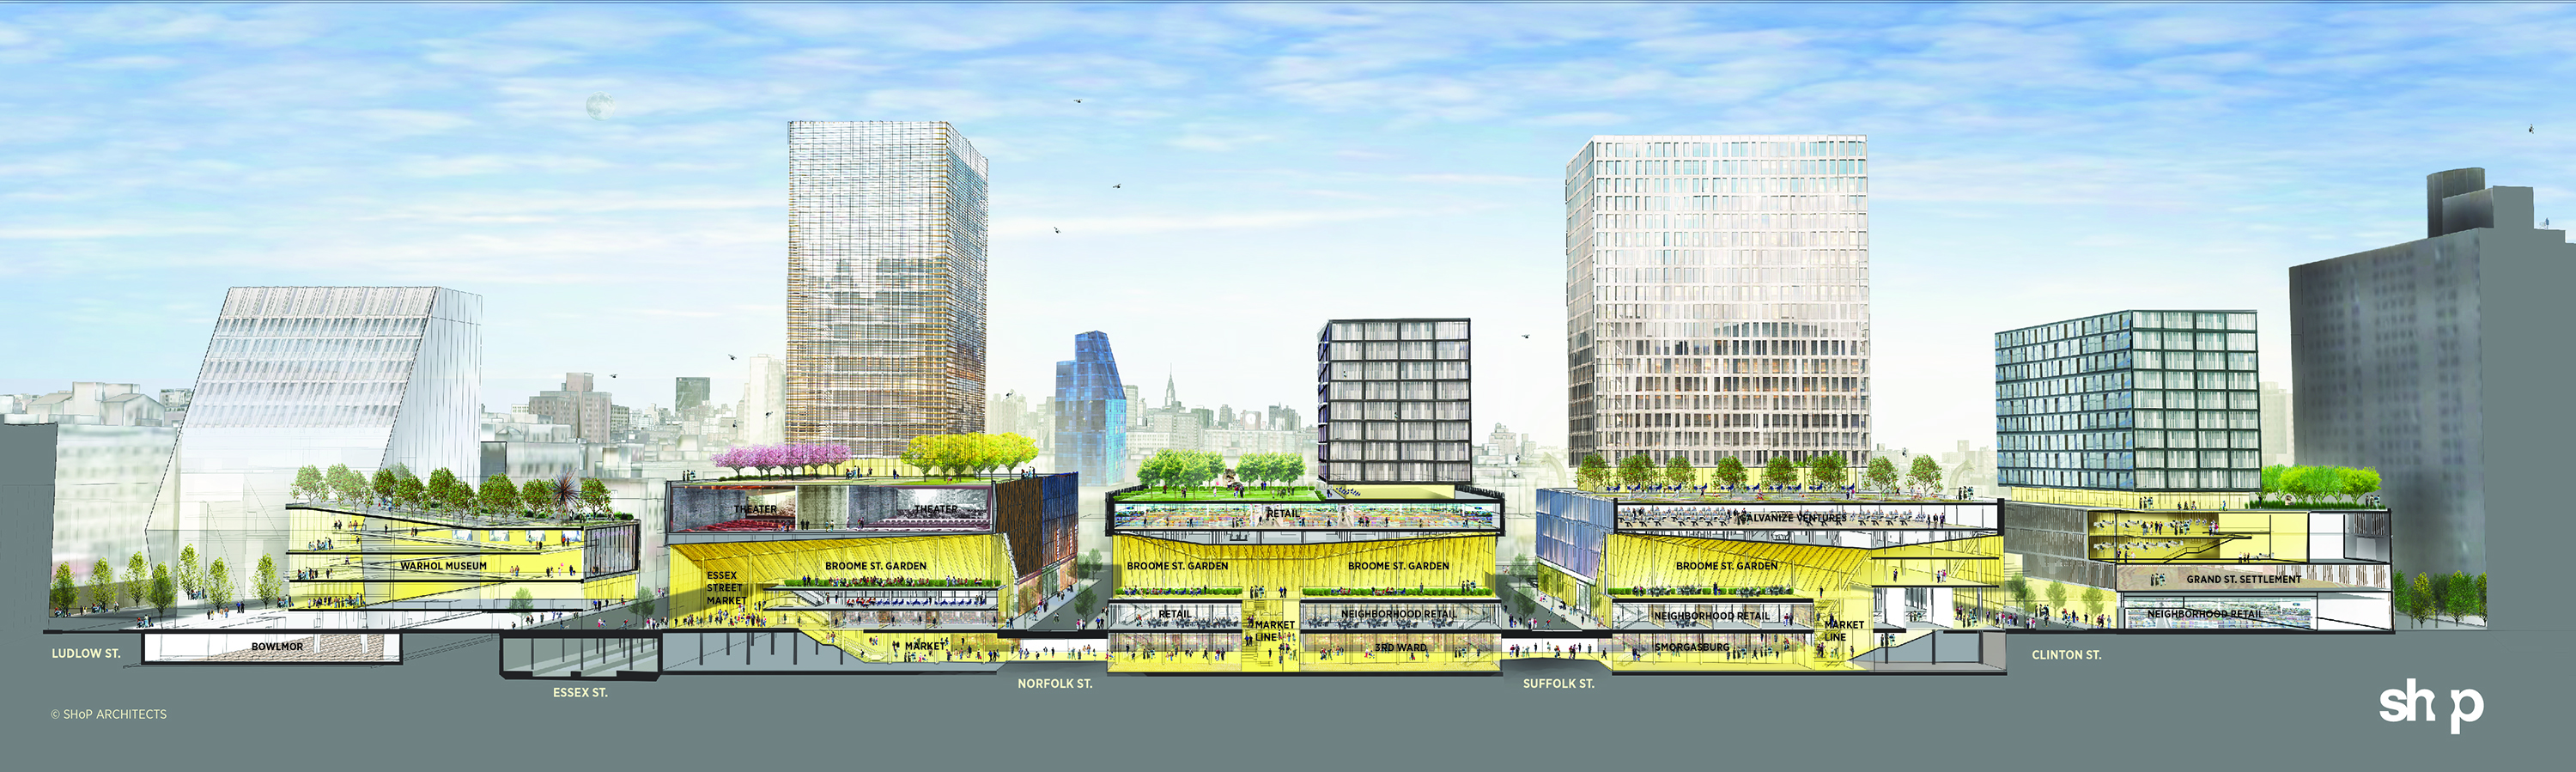 Market Line schematic, showing sites 2, 3, and 4 connected. Via Curbed.